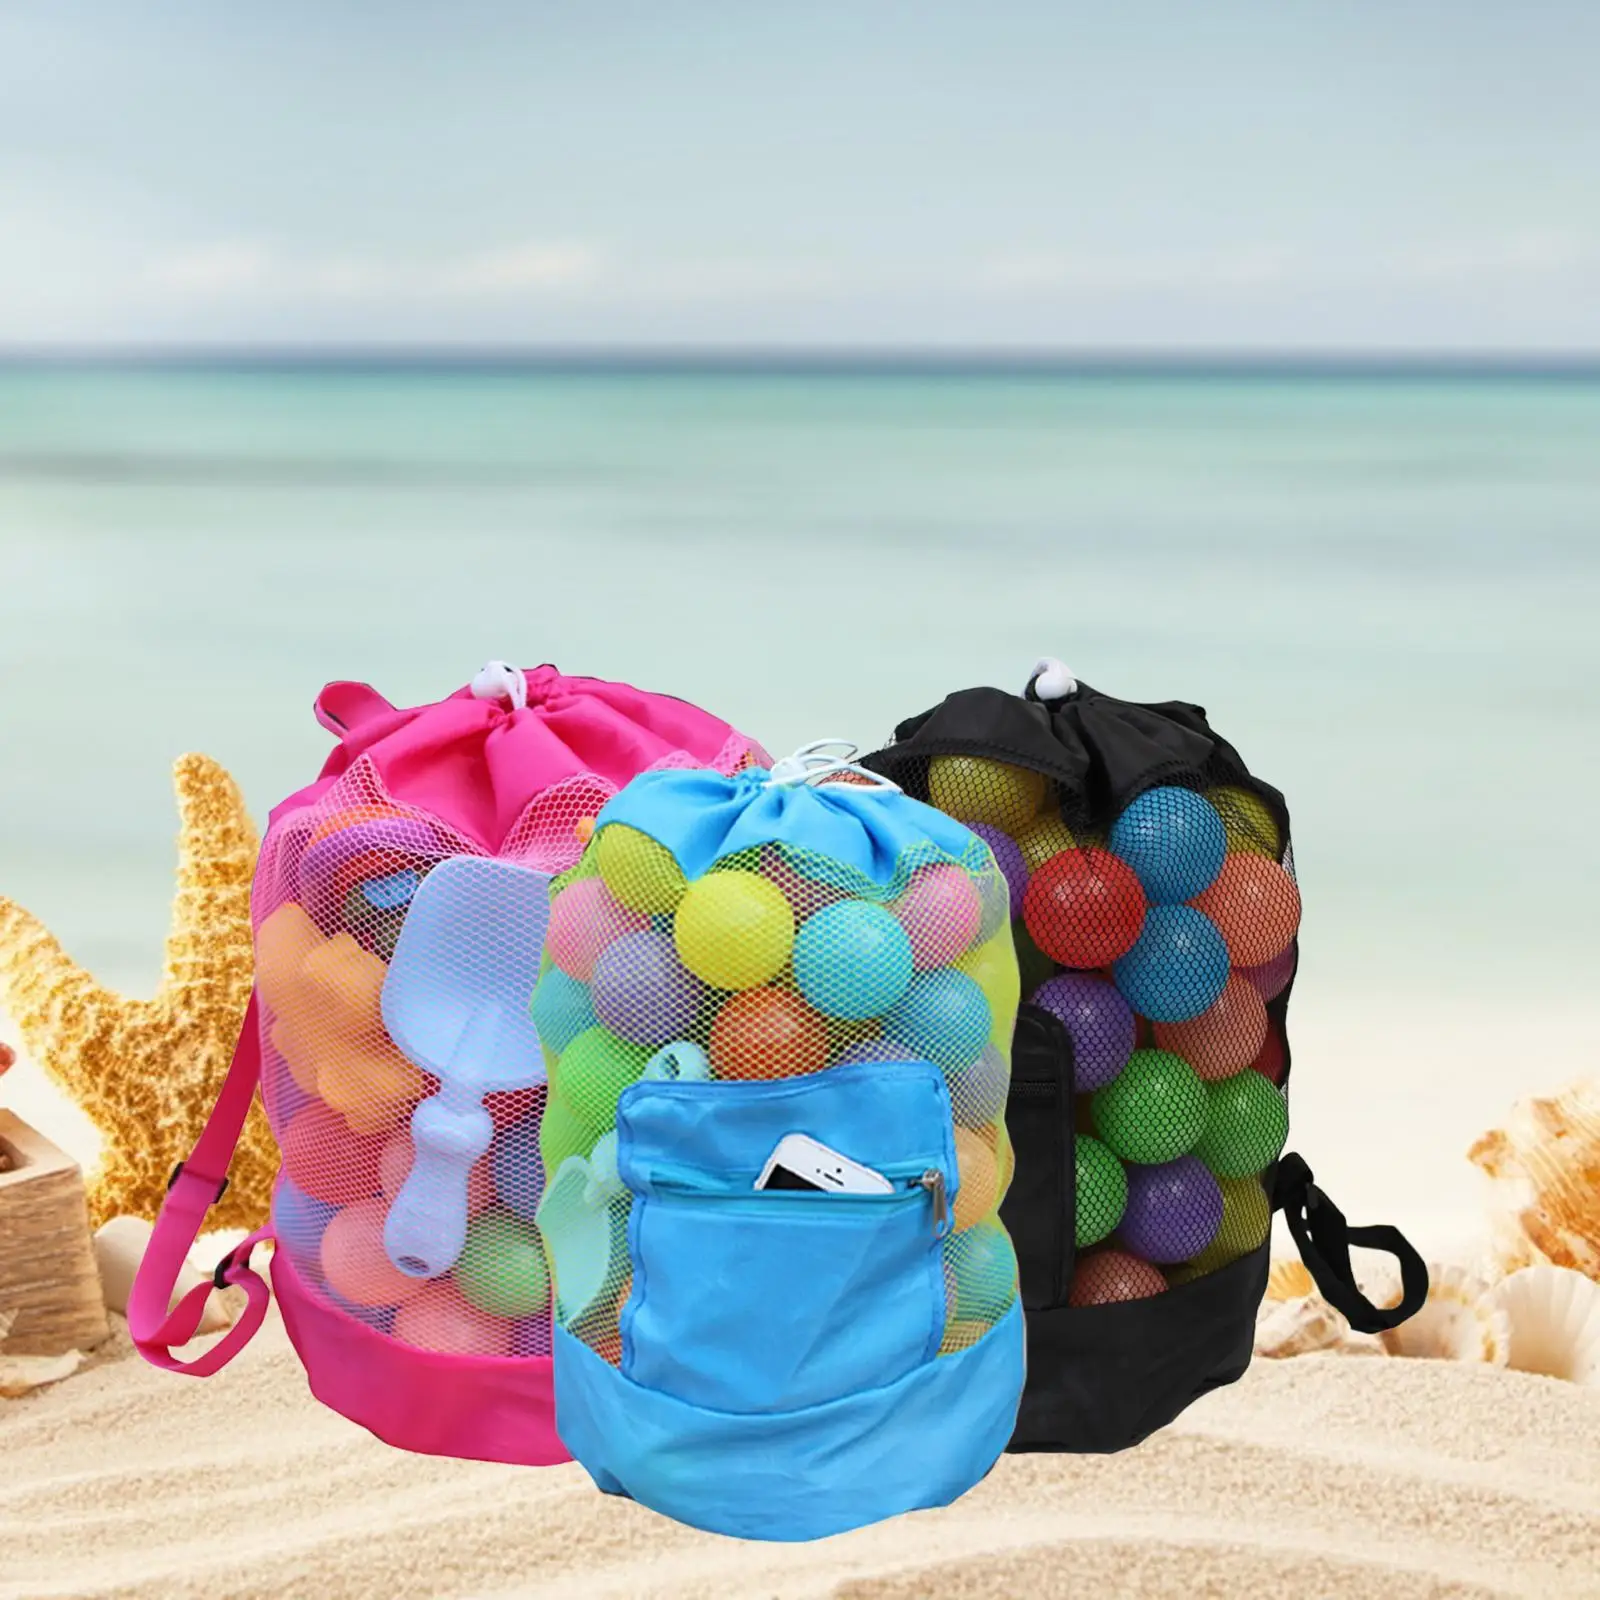 Kids Beach Bag Storage Pouch Tote Travel Toy Organizer Quick Dry Sea Shell Bags for Vacation Swimming Household Holiday Devices